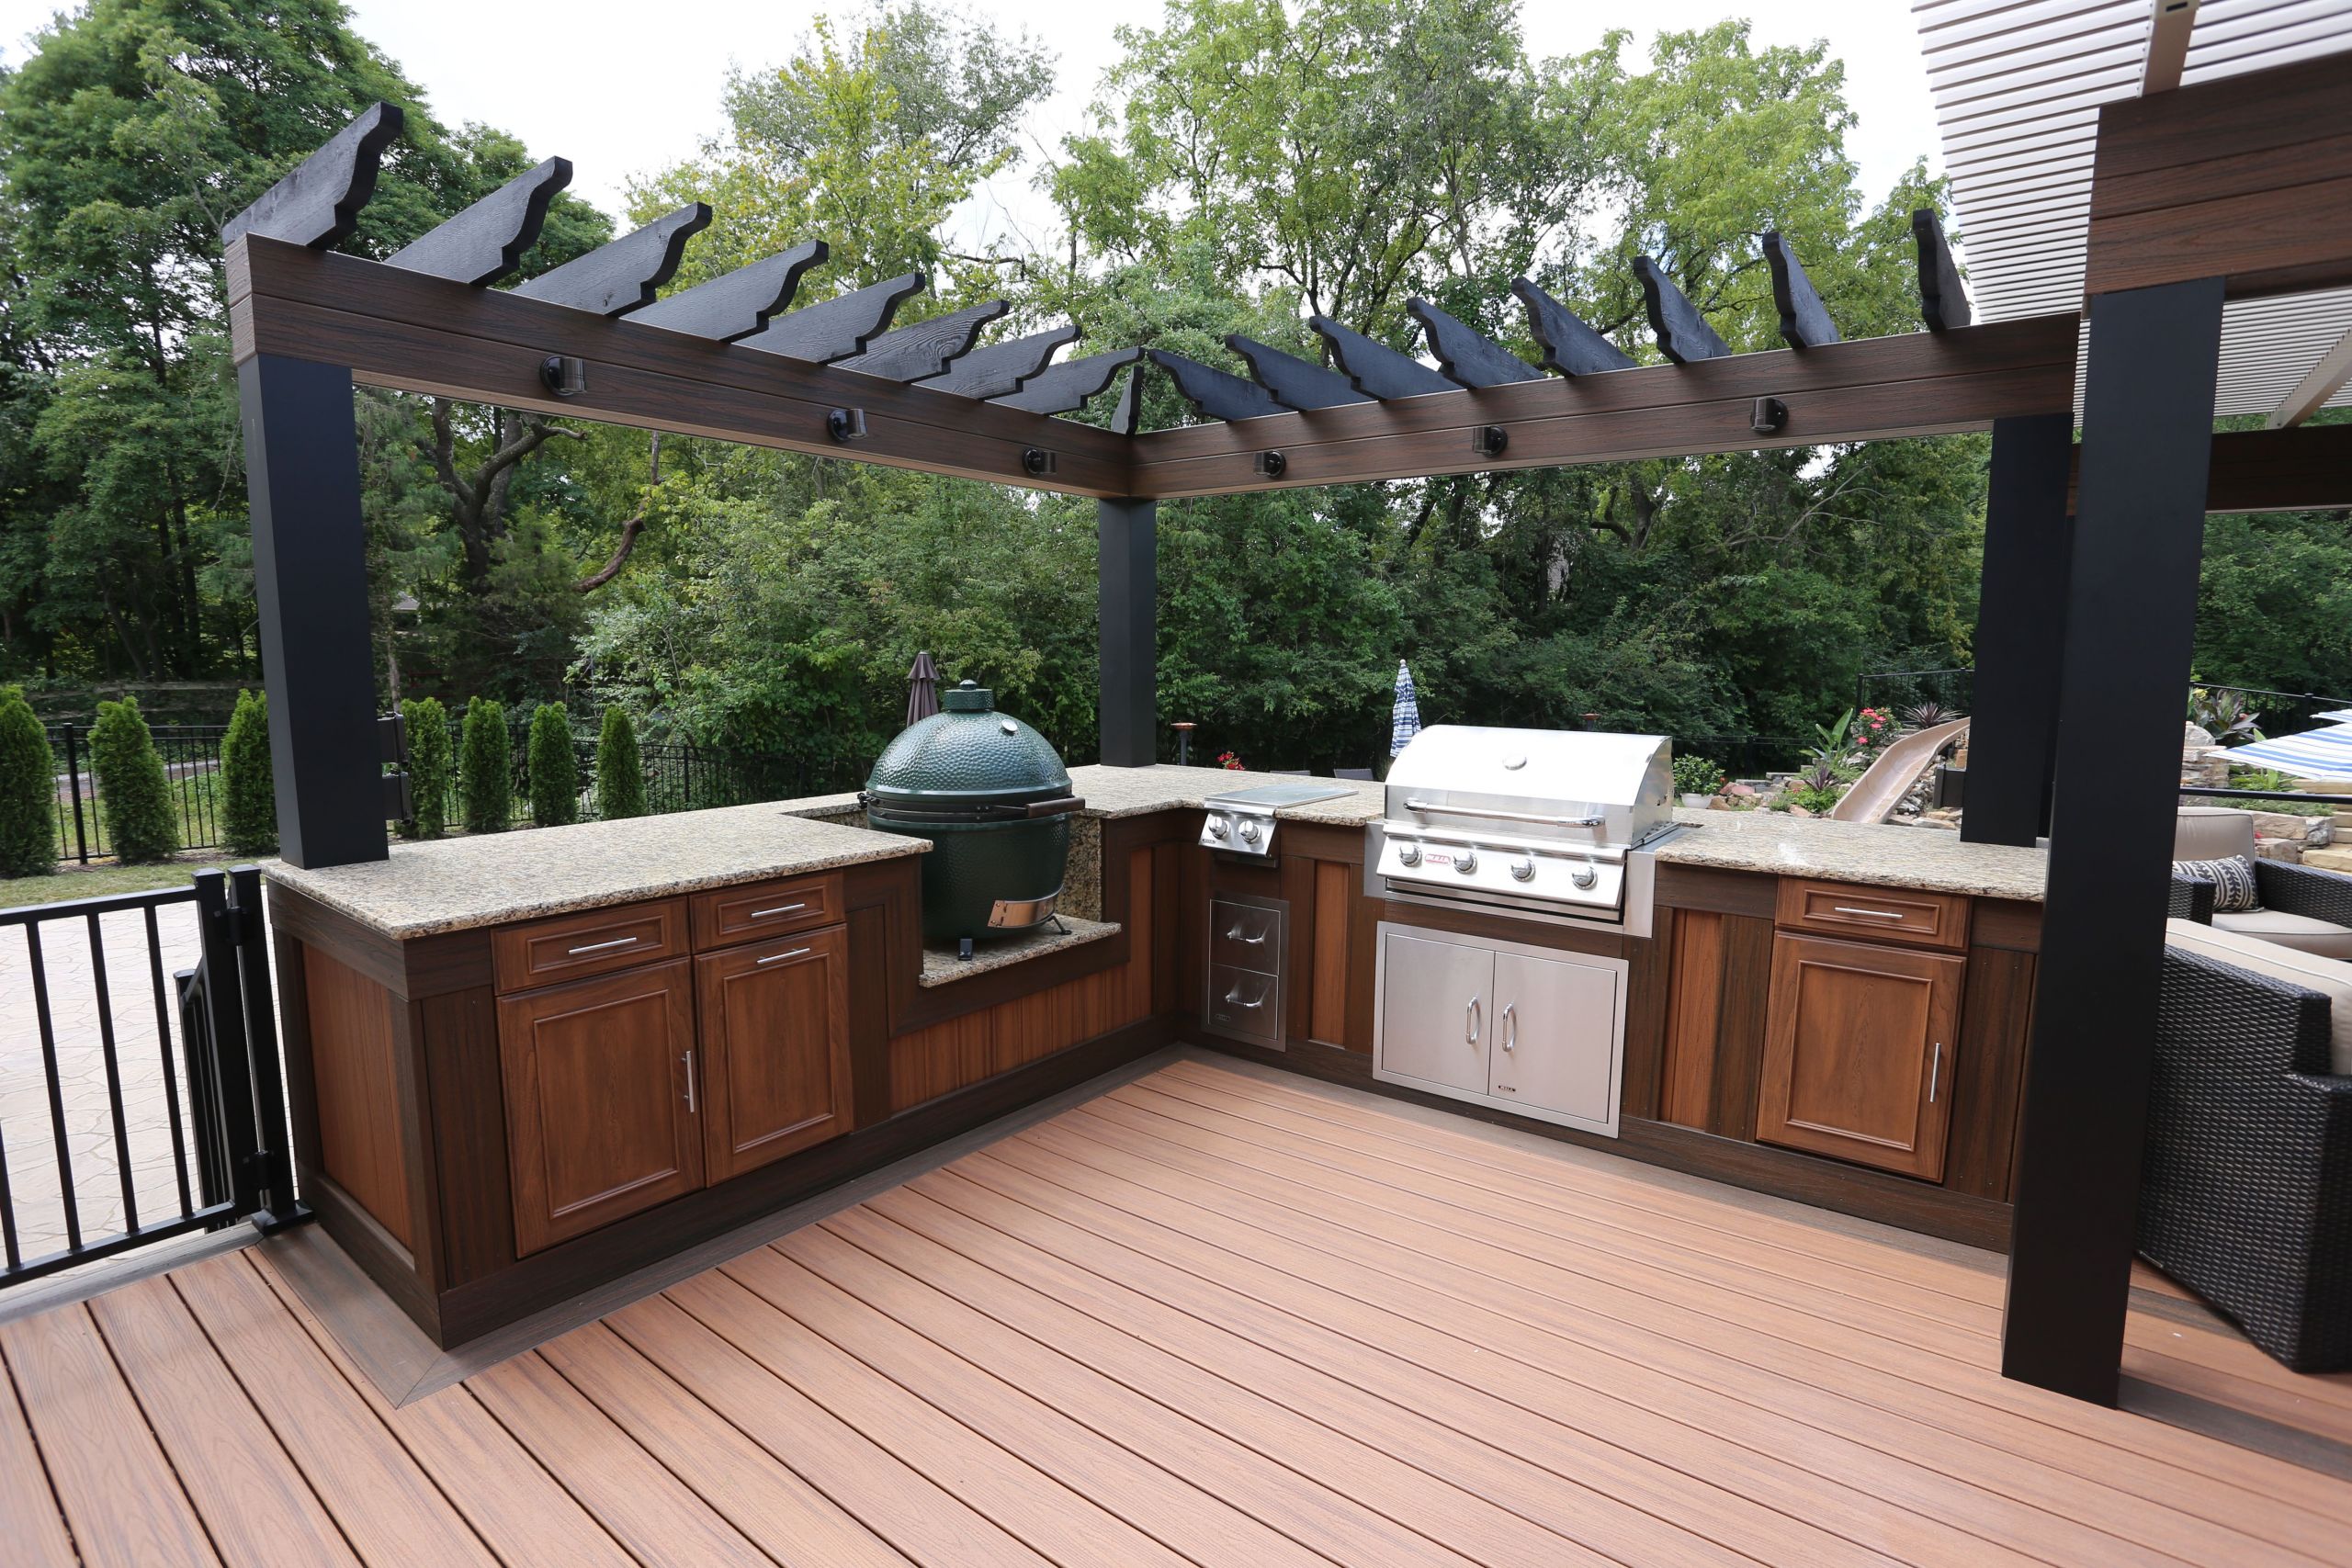 Outdoor Kitchen On Deck
 posite deck with outdoor kitchen in St Louis MO